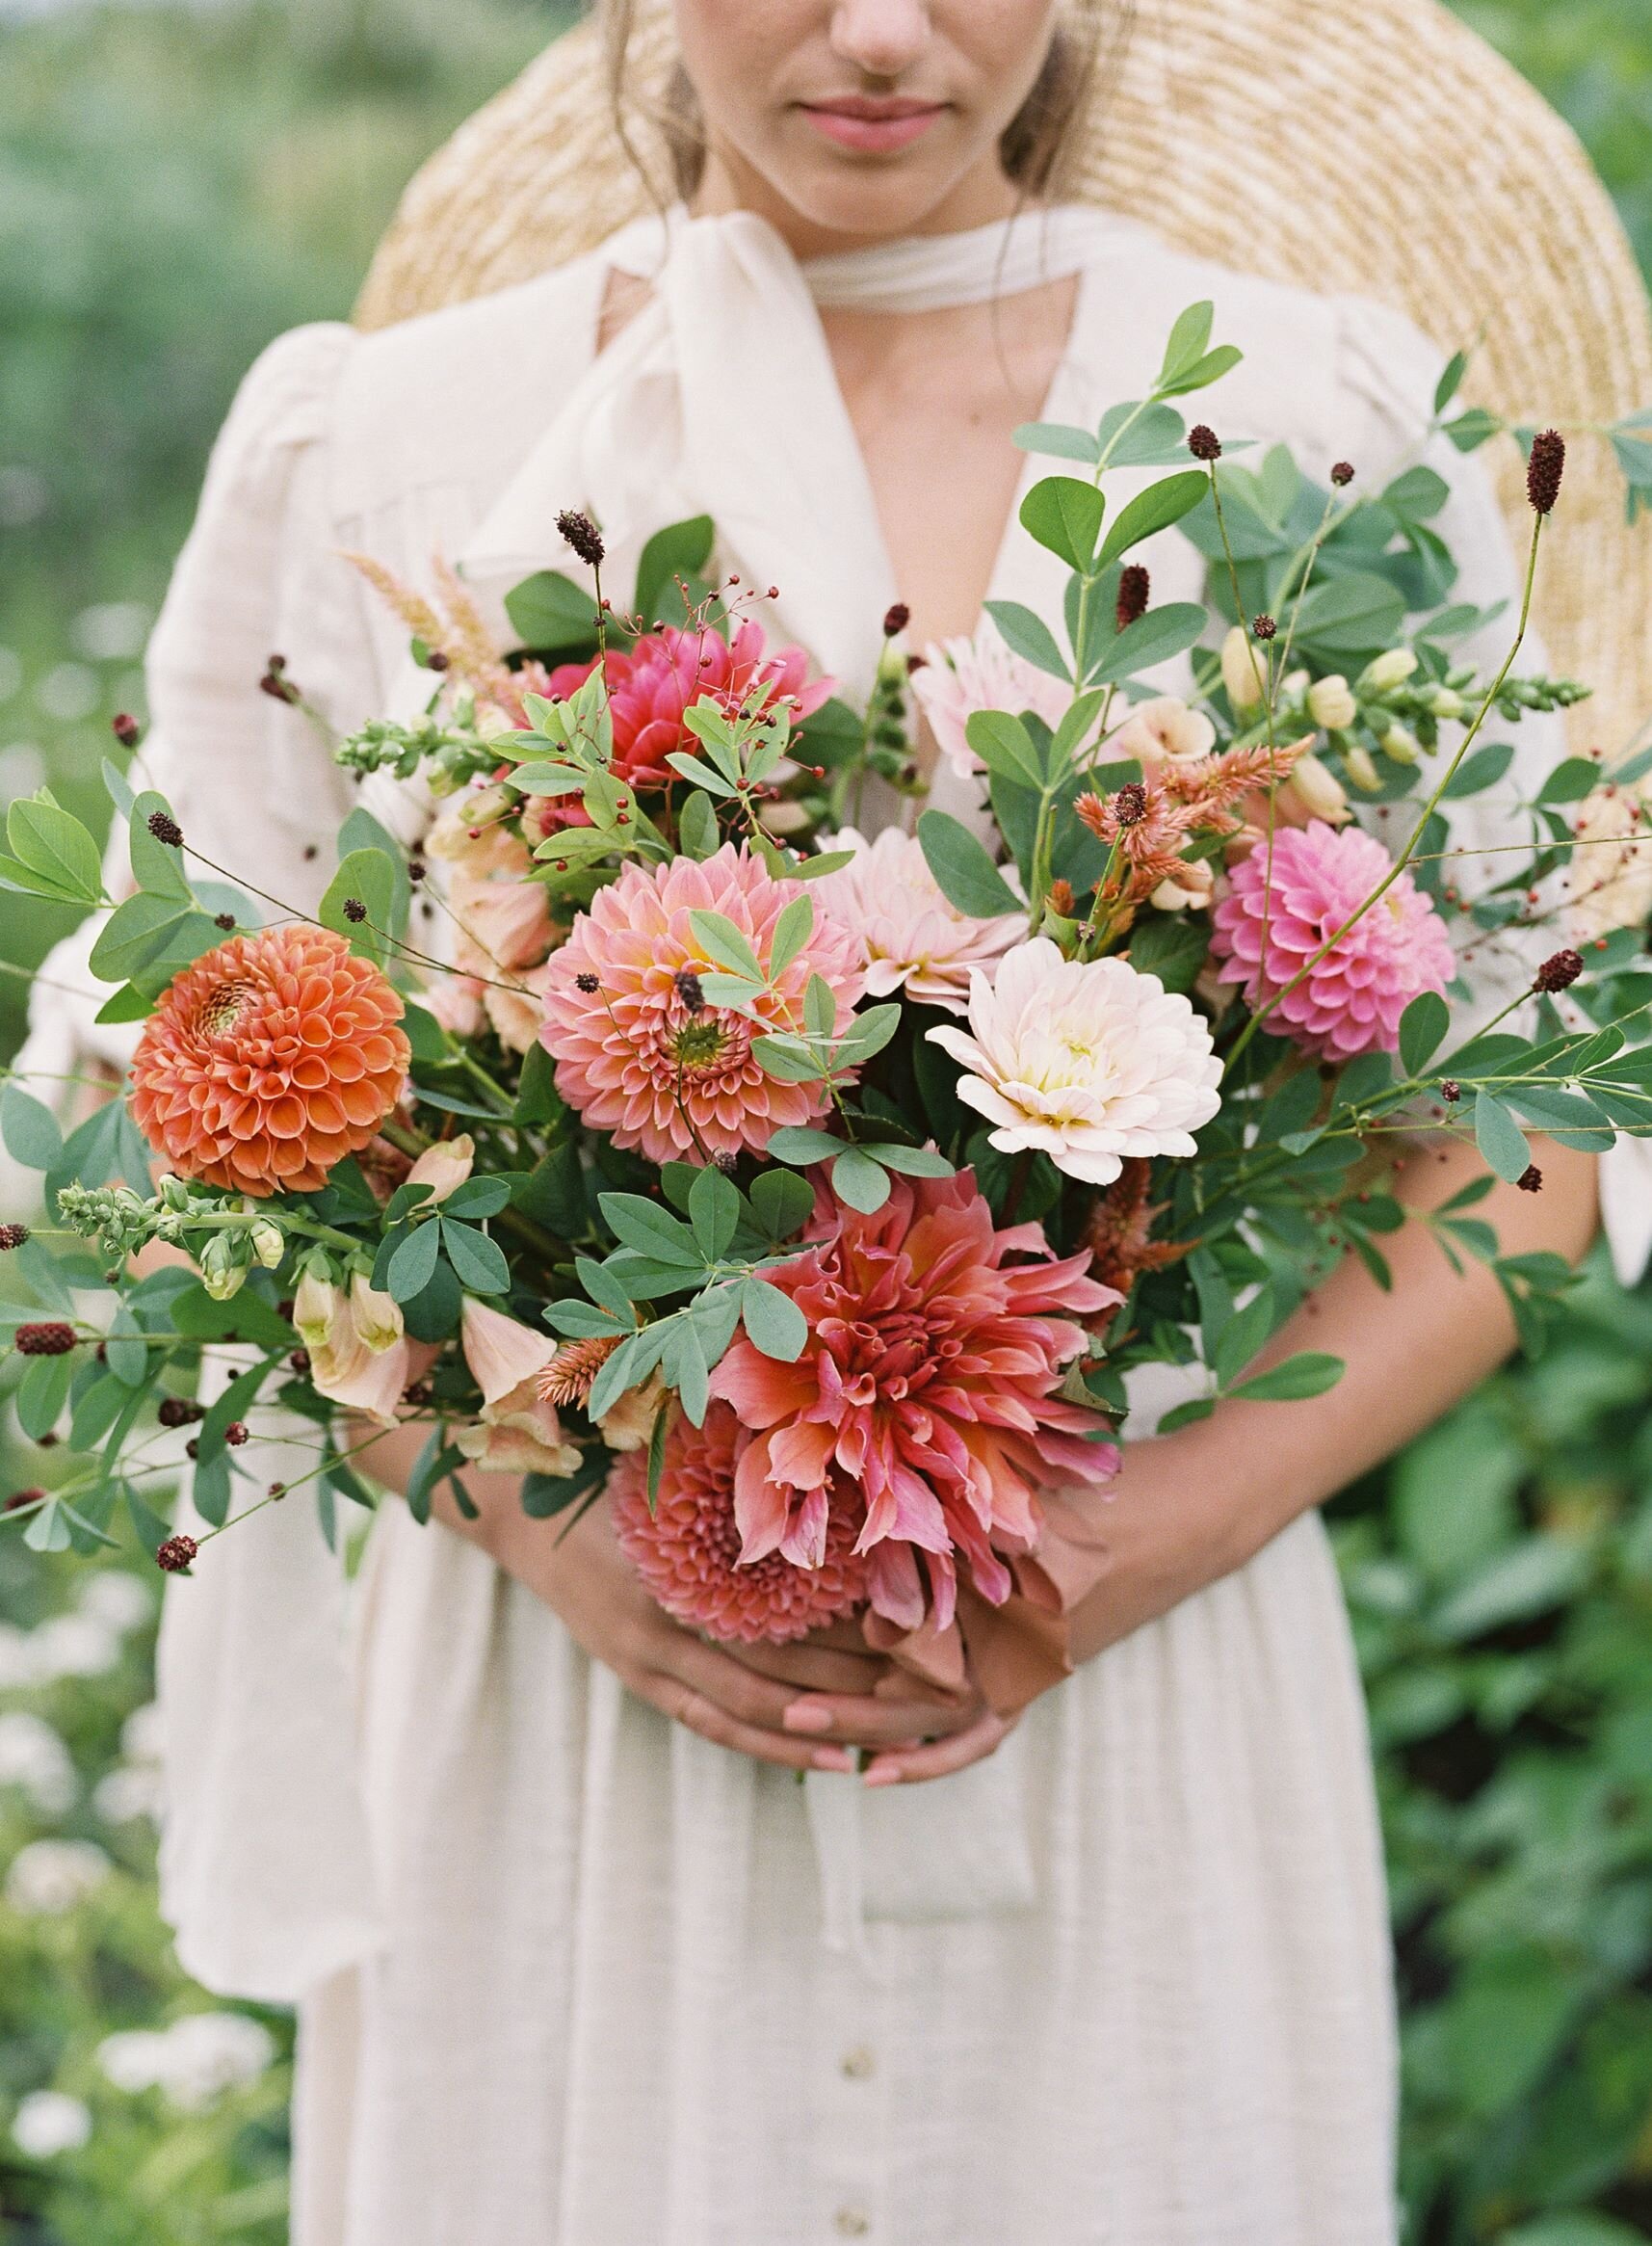 Rose_and_Laurel_Fall_Bouquet_at_Blue_Sky_Flower_Farm_Shasta_Bell_Photographie.jpg